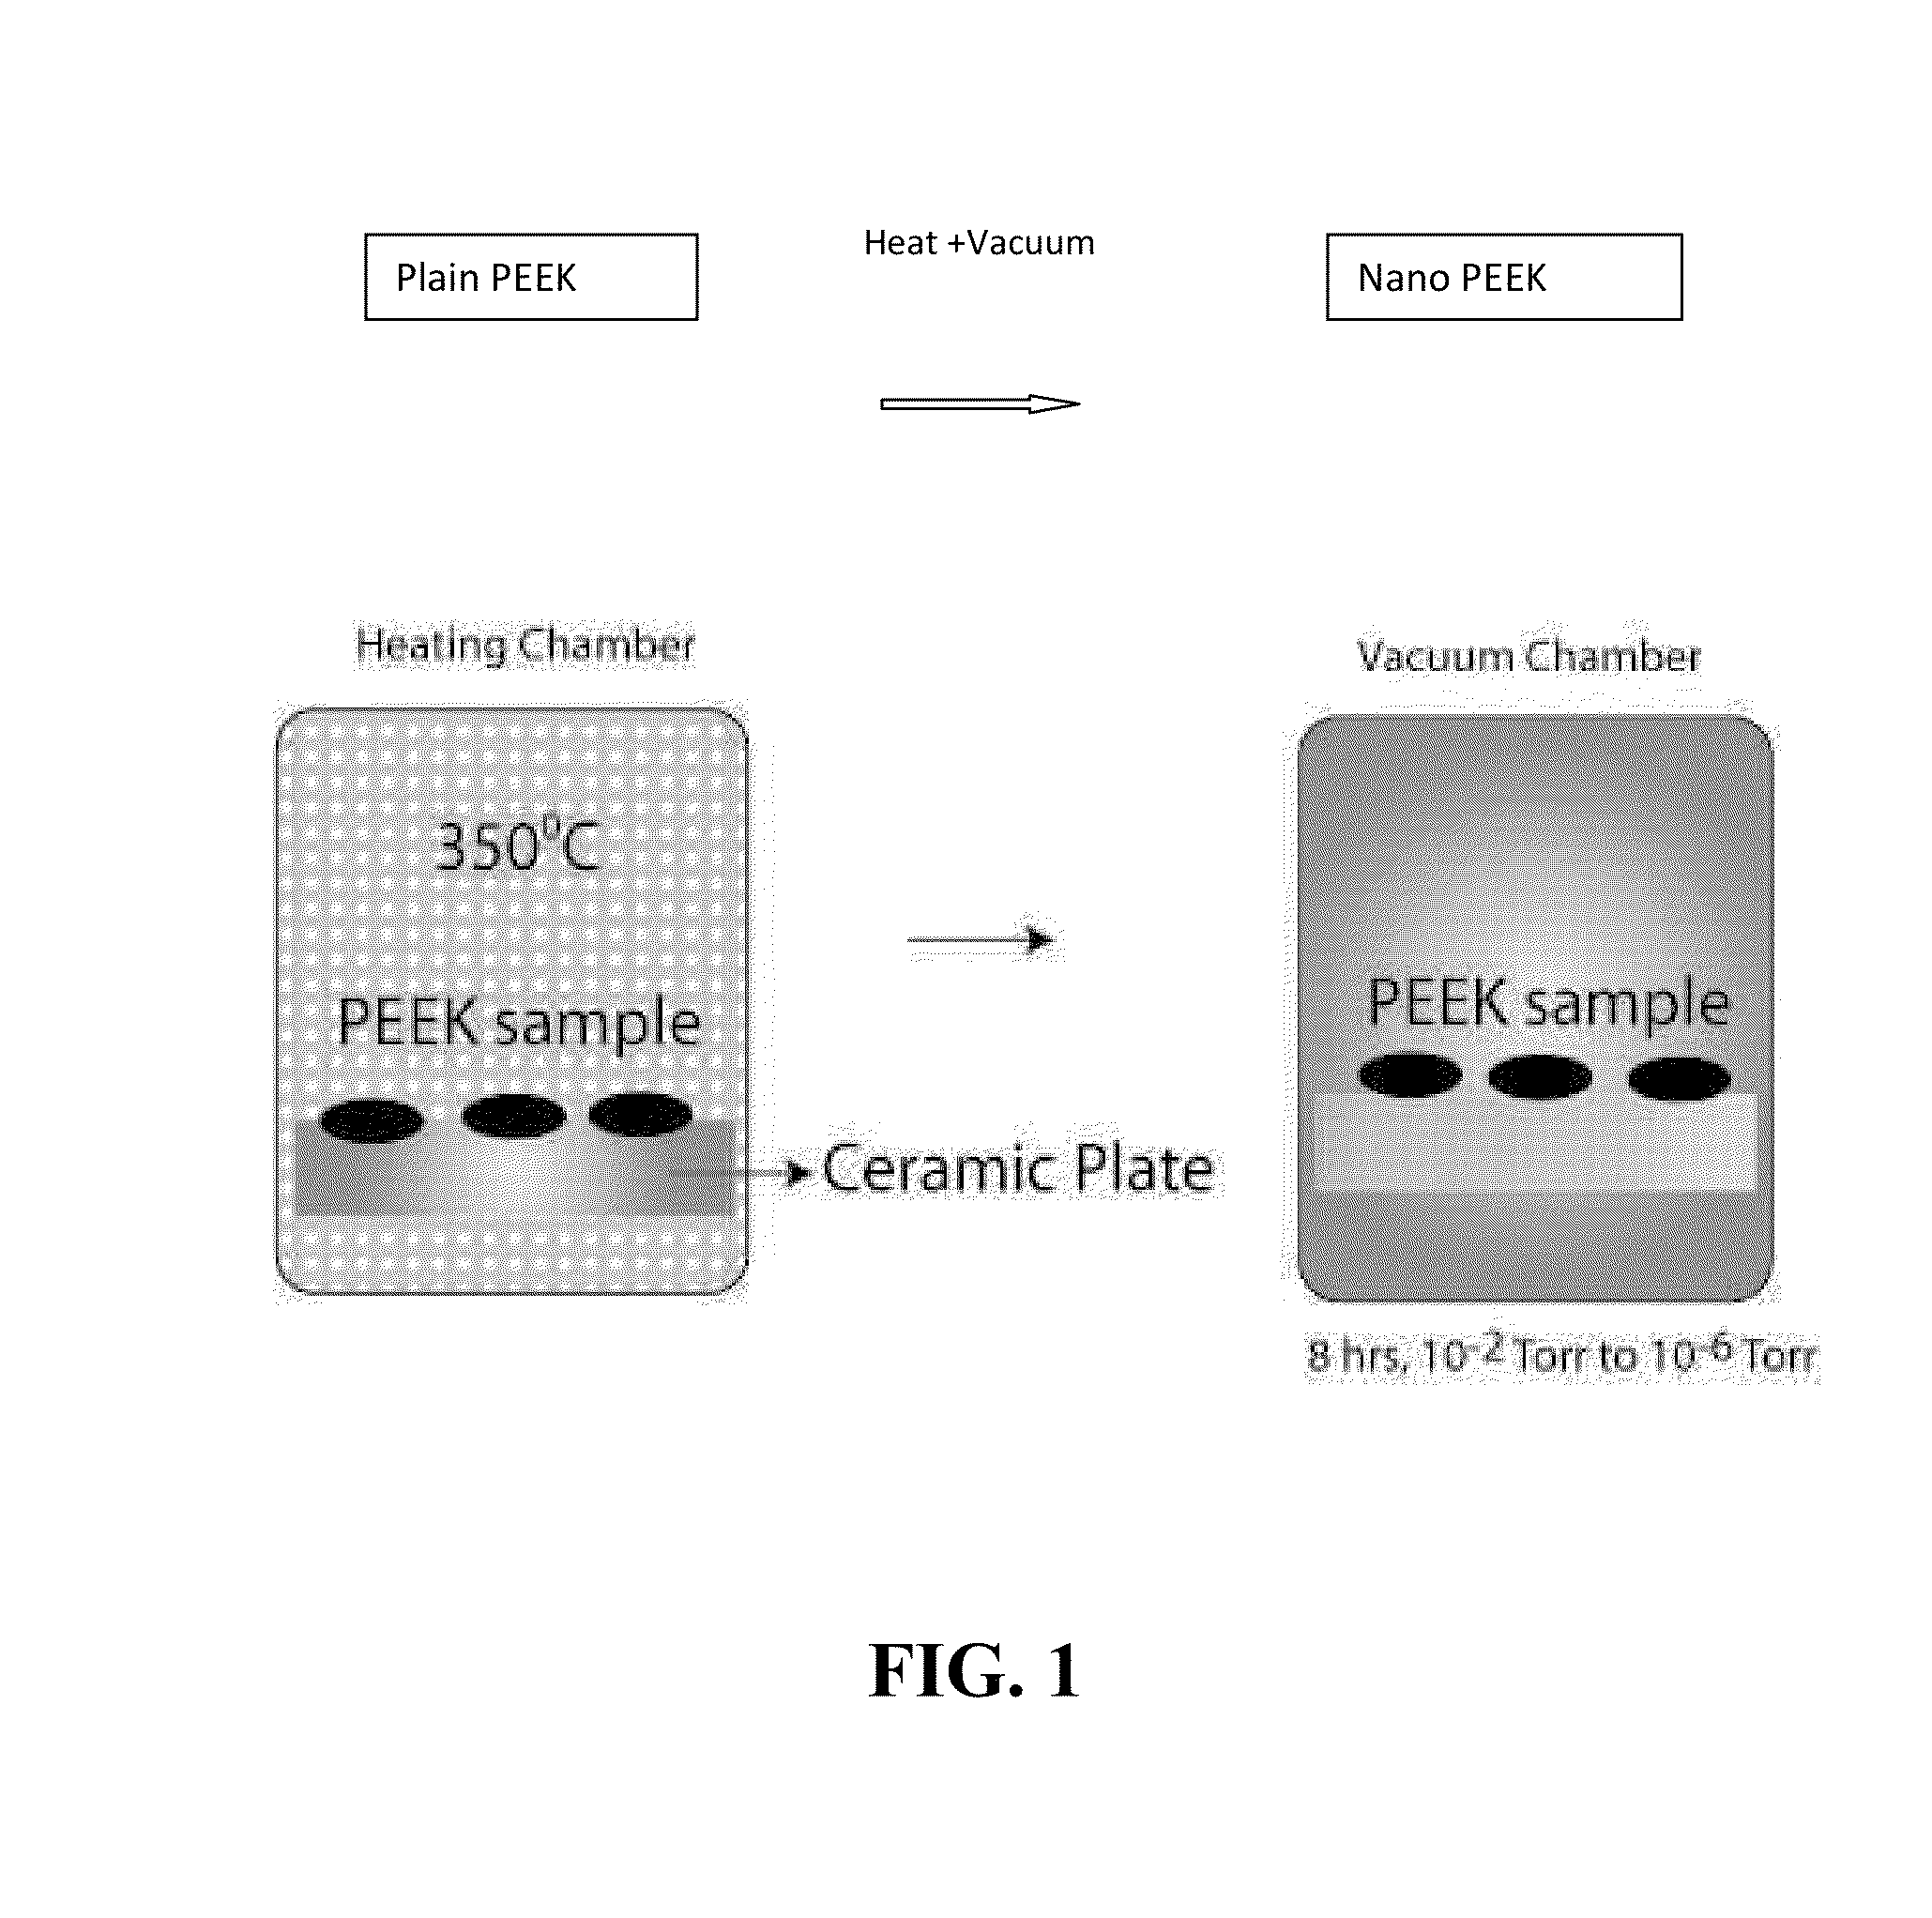 Method for producing nanosurfaces with nano, micron, and/or submicron structures on a polymer